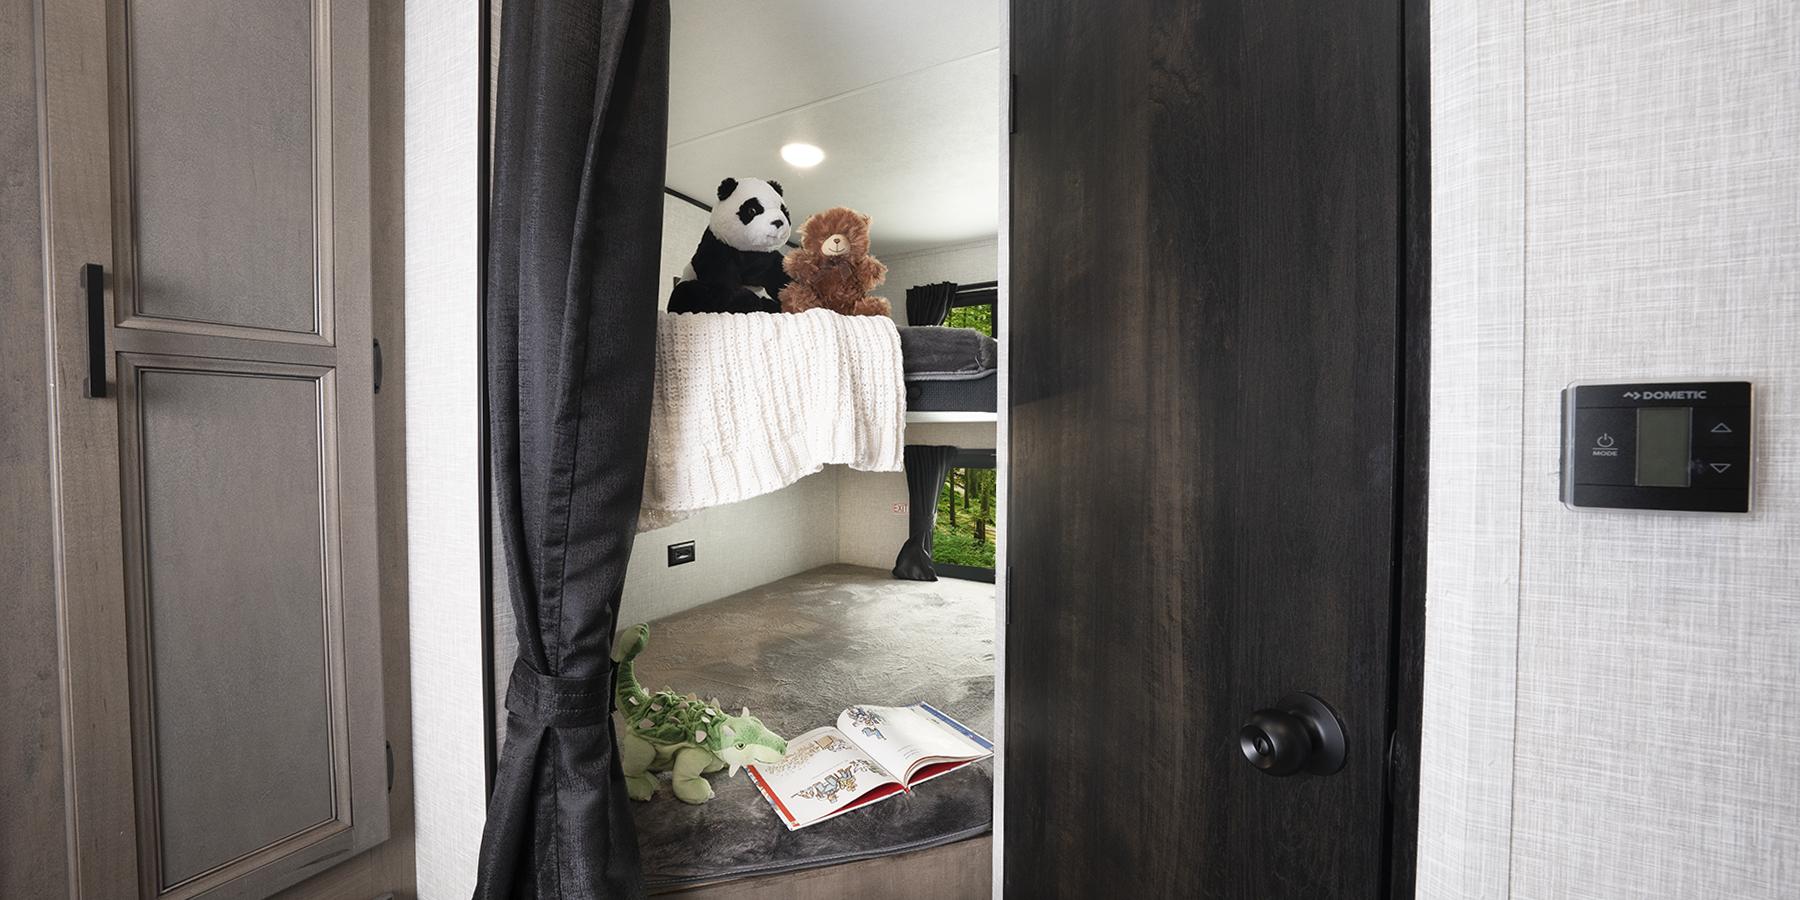 Through an open doorway with a drawn curtain tied off to one side, two double-sized bunks are visible, with childrens' books and stuffed animals neatly placed on top of the covers.